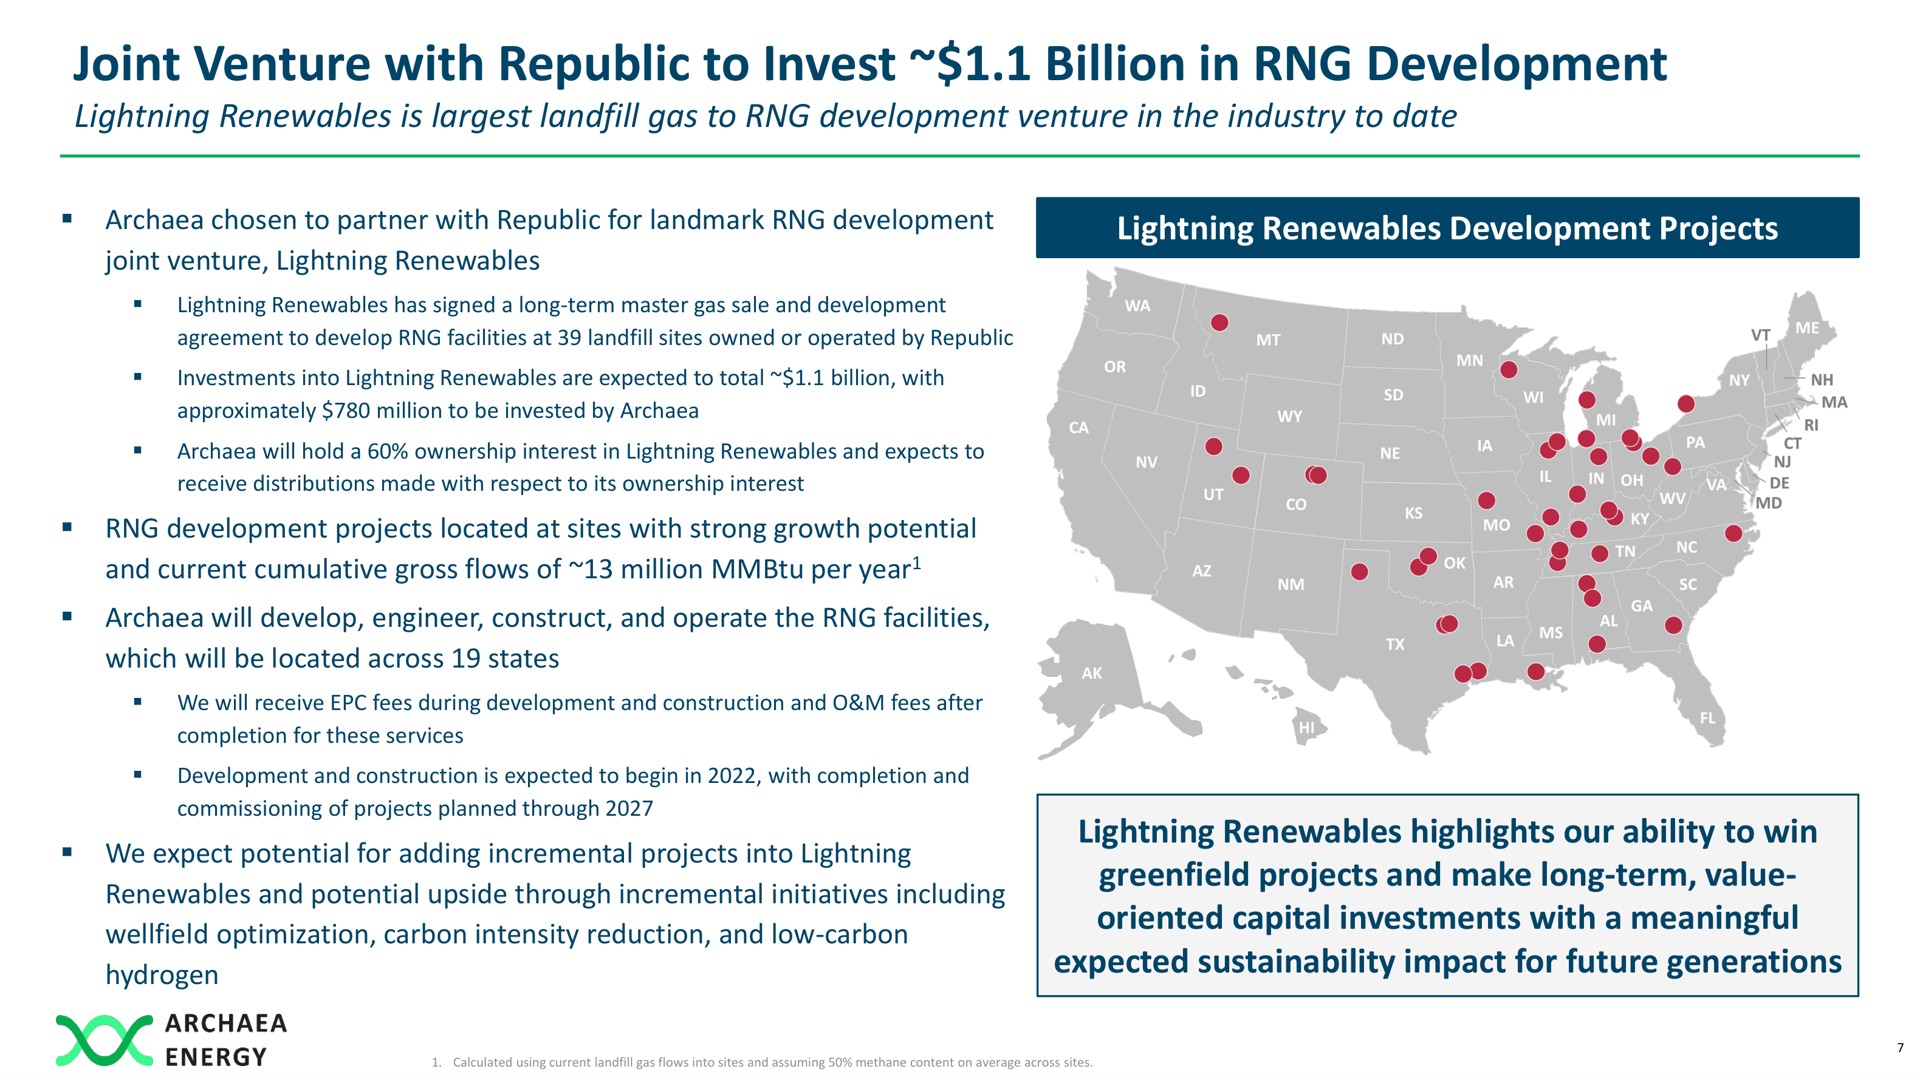 joint venture with republic to invest billion in development | Archaea Energy